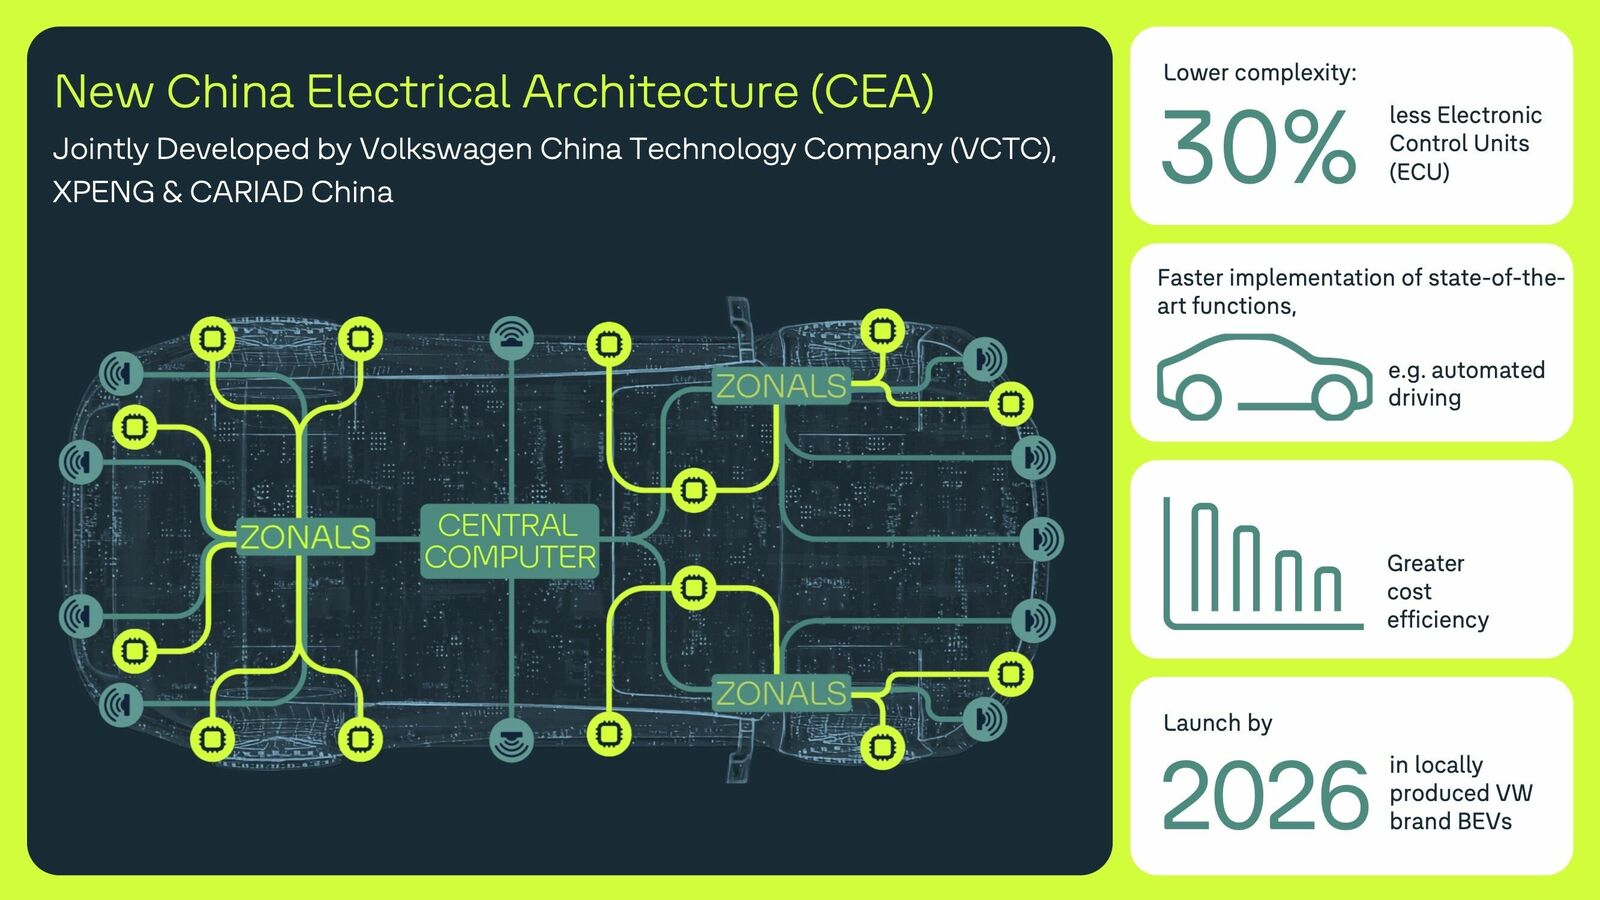 New China Electrical Architecture (CEA)